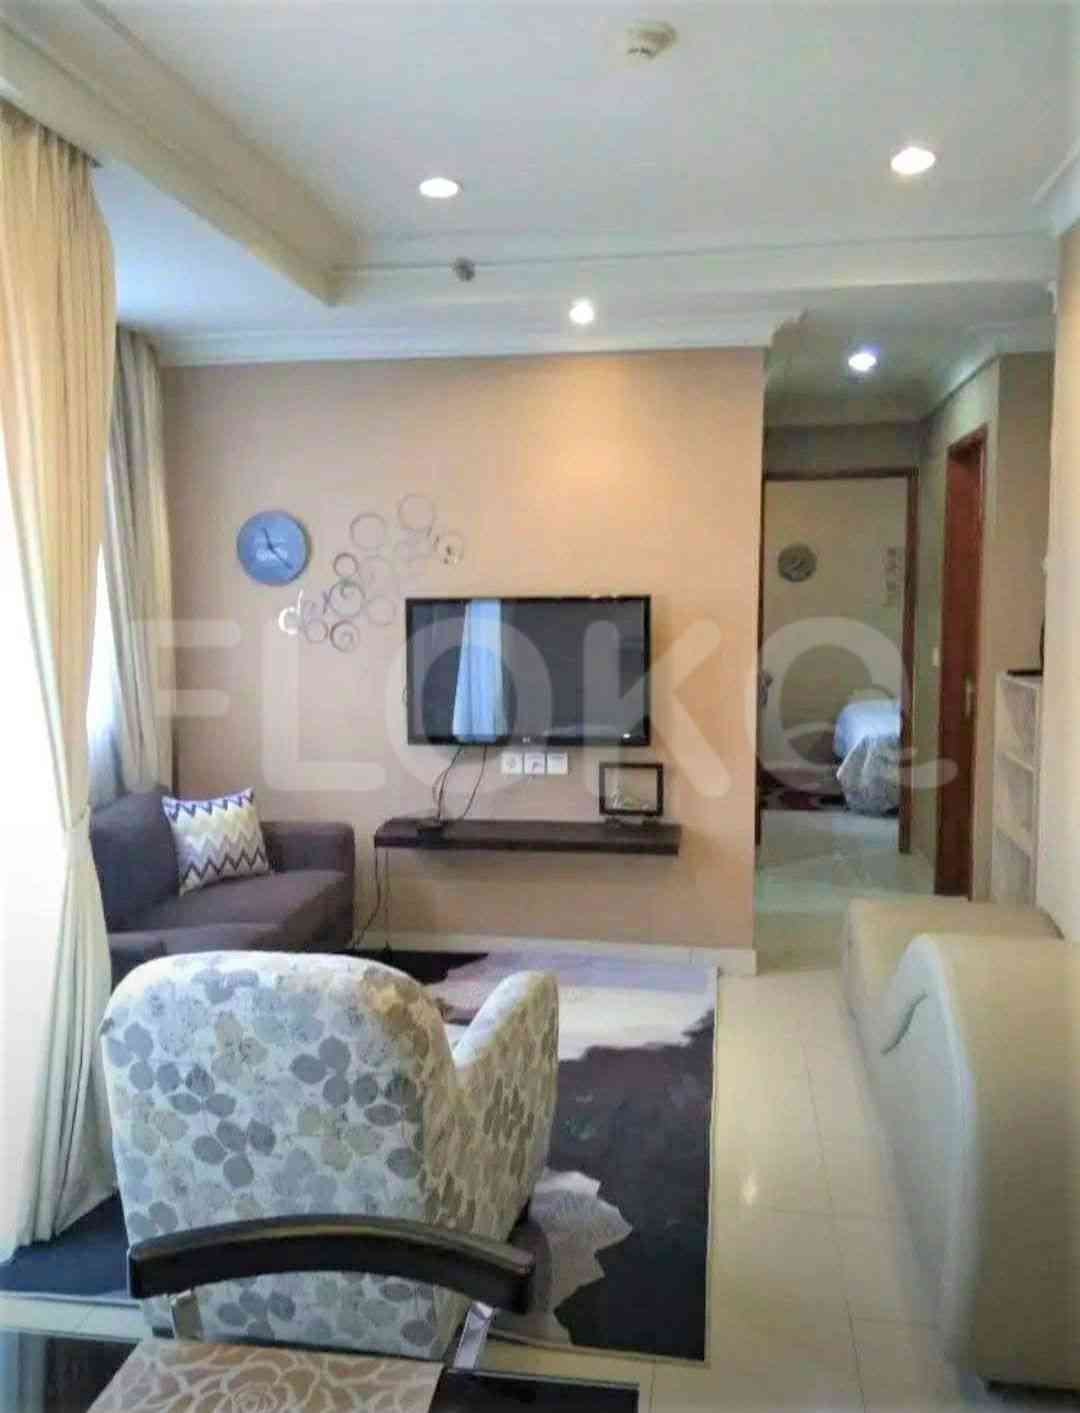 2 Bedroom on 15th Floor for Rent in Kuningan Place Apartment - fku817 7